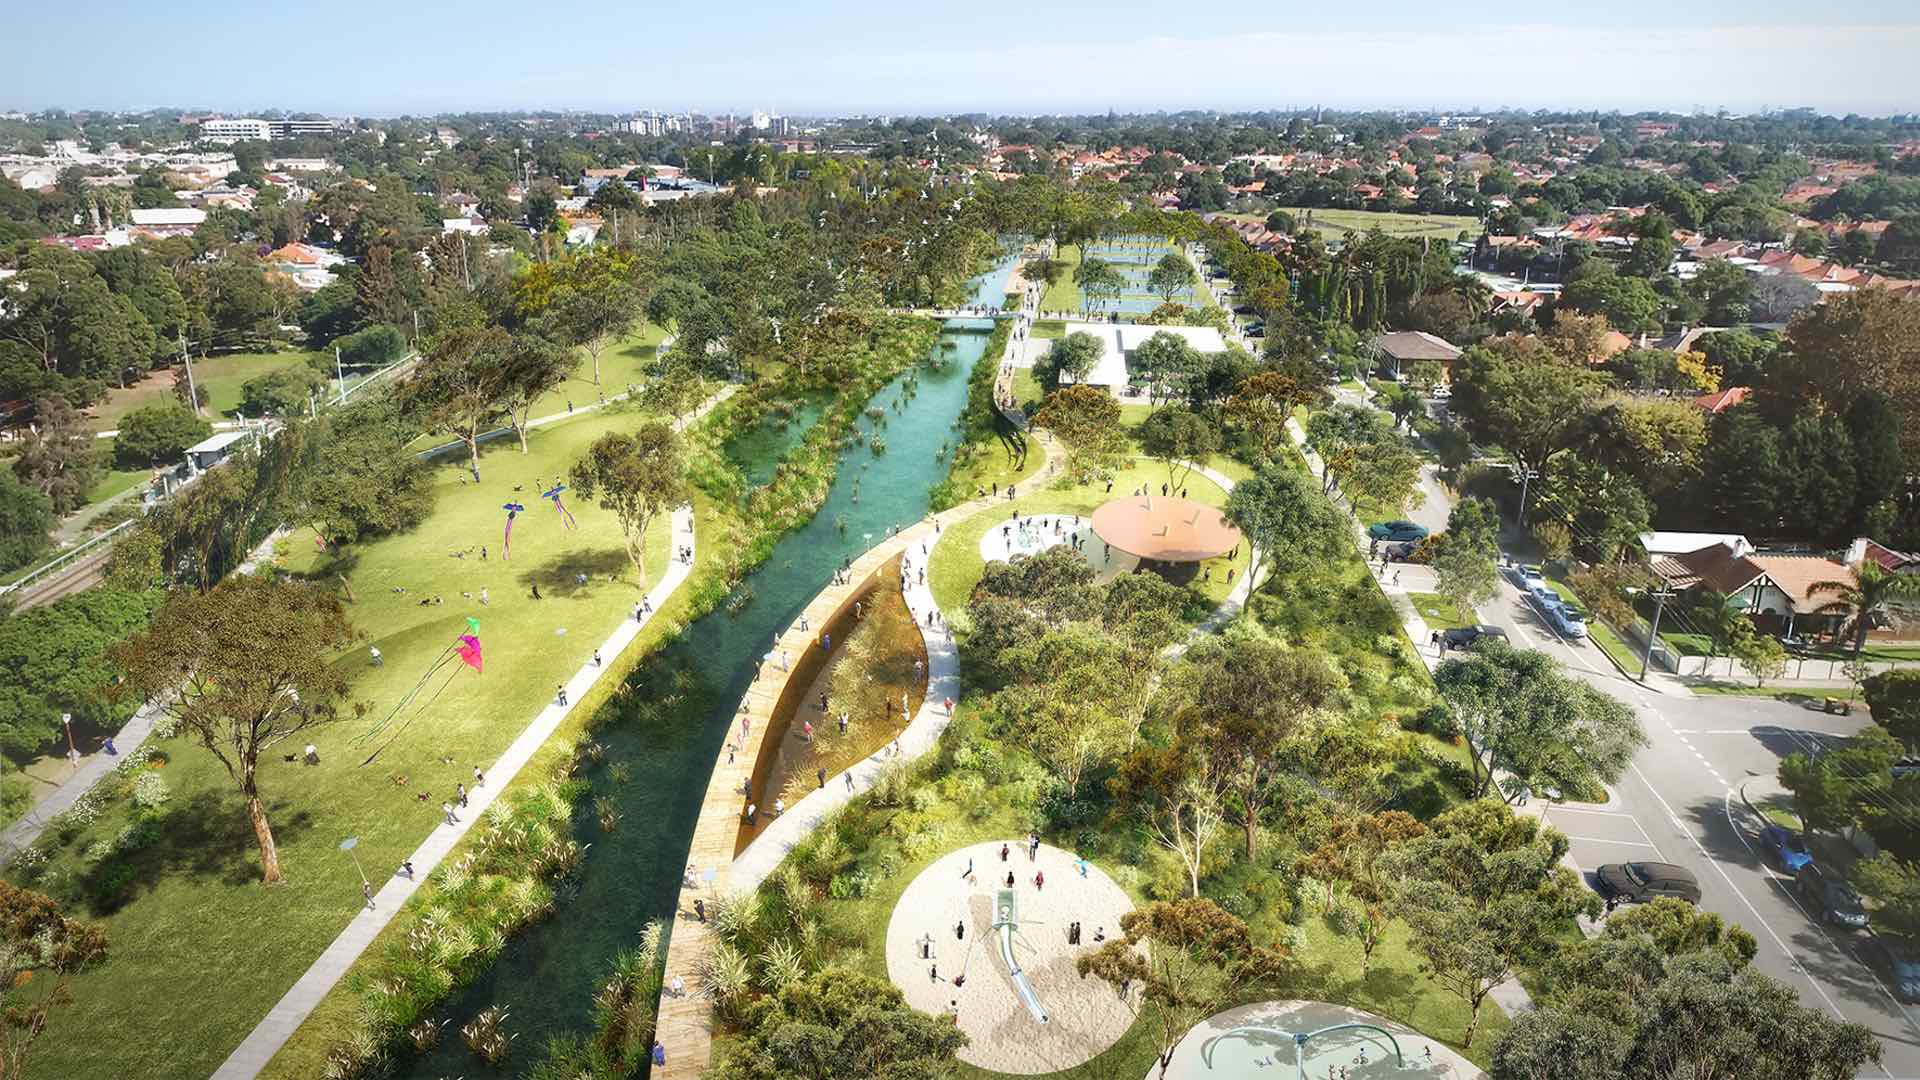 Inner West Sydney's Car-Free GreenWay Is One Step Closer to Becoming a Reality